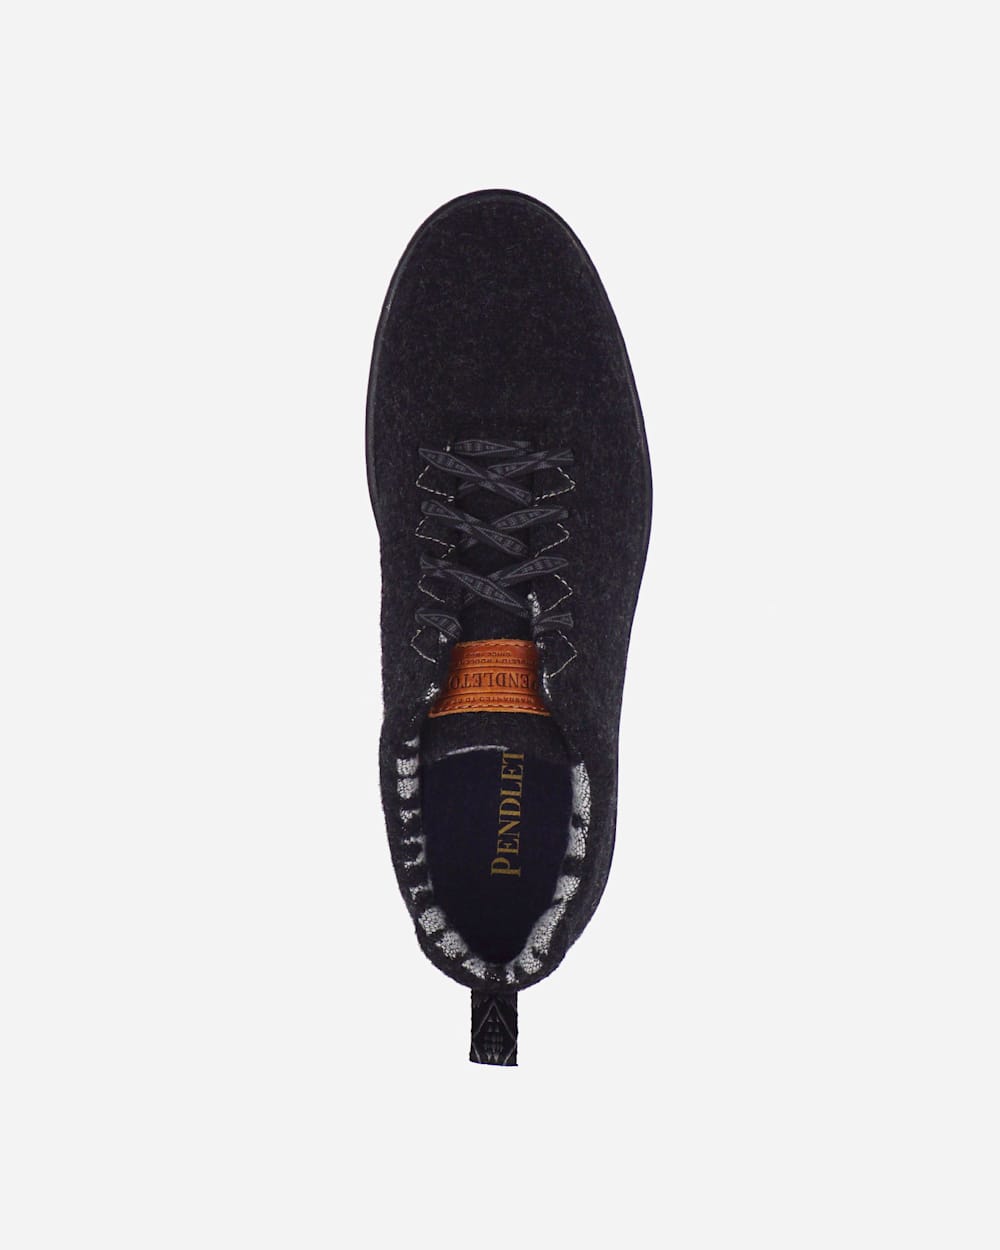 ALTERNATE VIEW OF WOMEN'S PENDLETON WOOL SNEAKERS IN CHARCOAL HEATHER image number 3